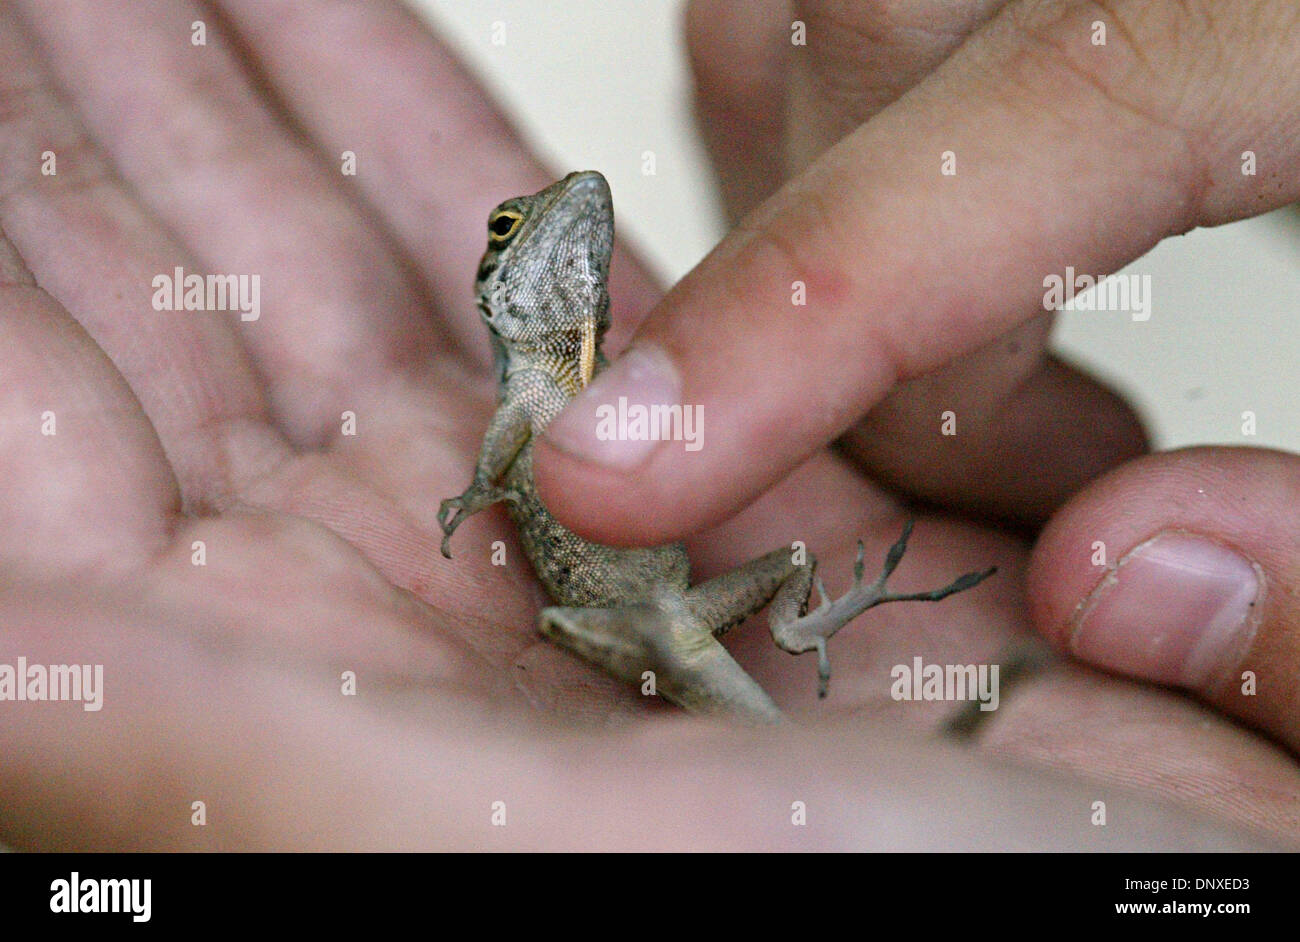 Dec 07, 2005; West Palm Beach, FL, USA; "I put my hand around them and cup them, turn them over on their backs and rub their belly and that makes them really relaxed," explained "lizard whisperer", Lily Capehart, 10, who catches, tames, and dresses up lizards found in her yard.  Her family has started taking photos of Lily's dresses lizards for a greeting card line.  Mandatory Cred Stock Photo